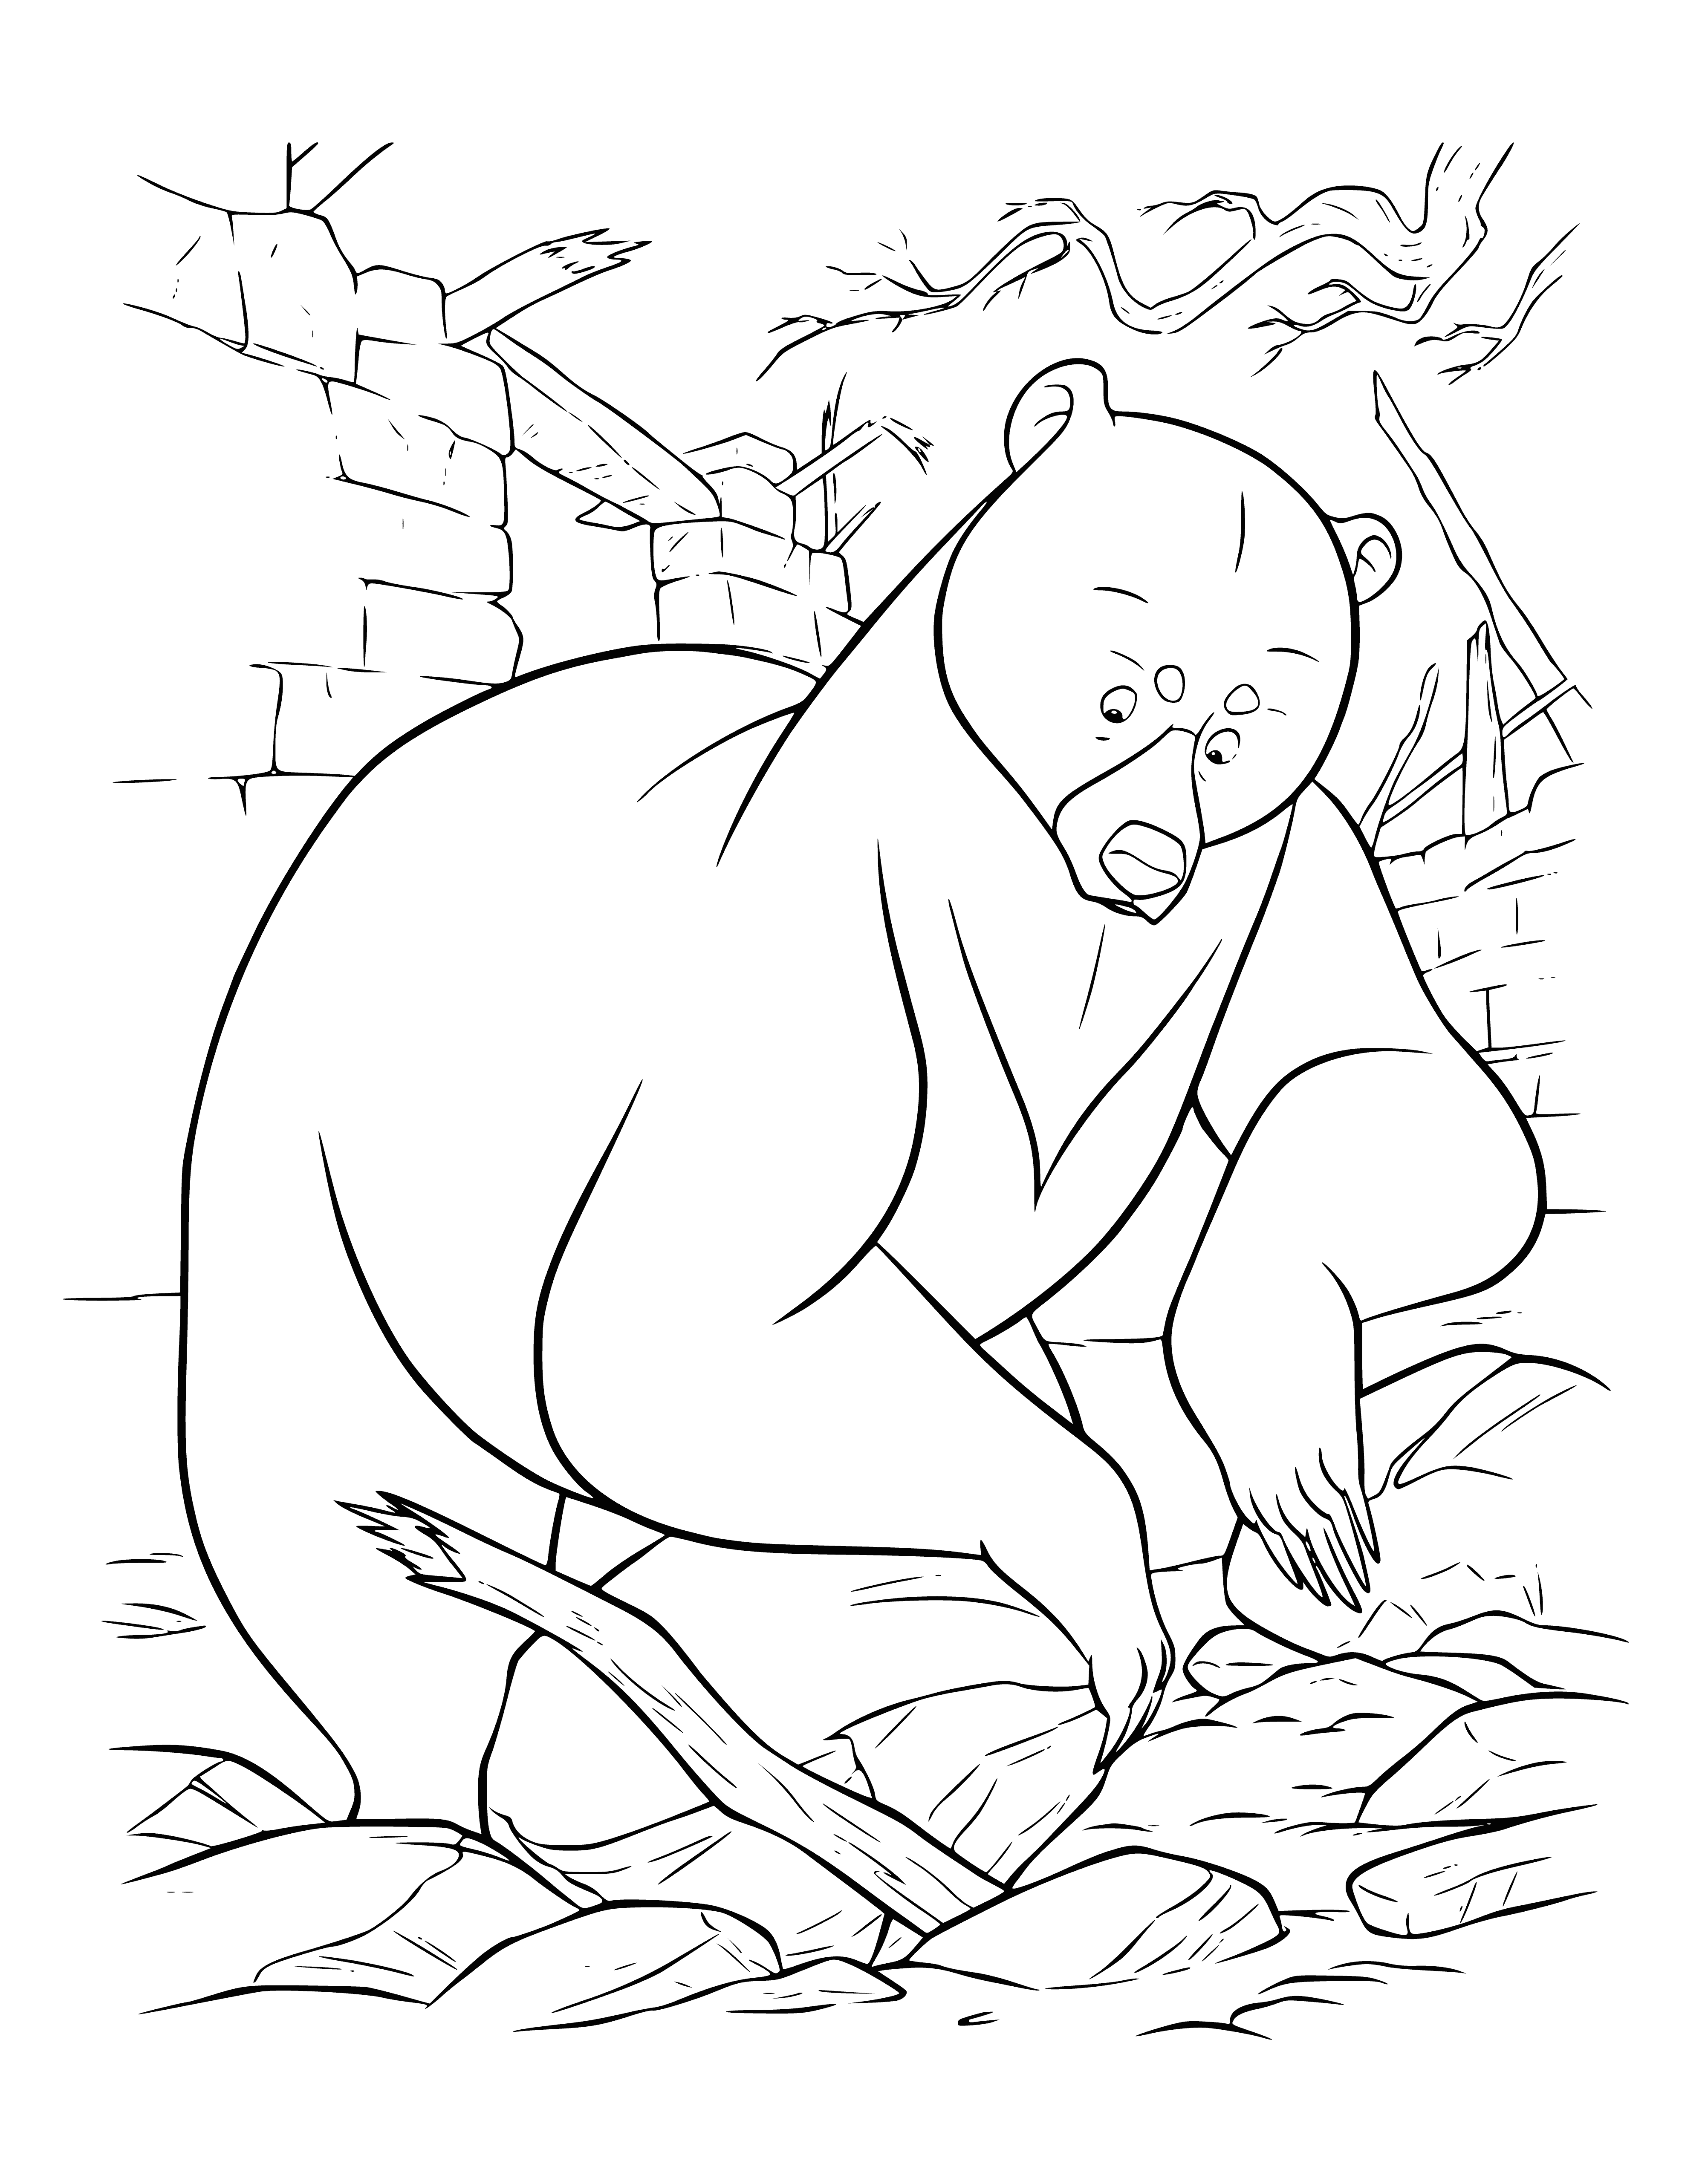 The bear is raking the stones coloring page